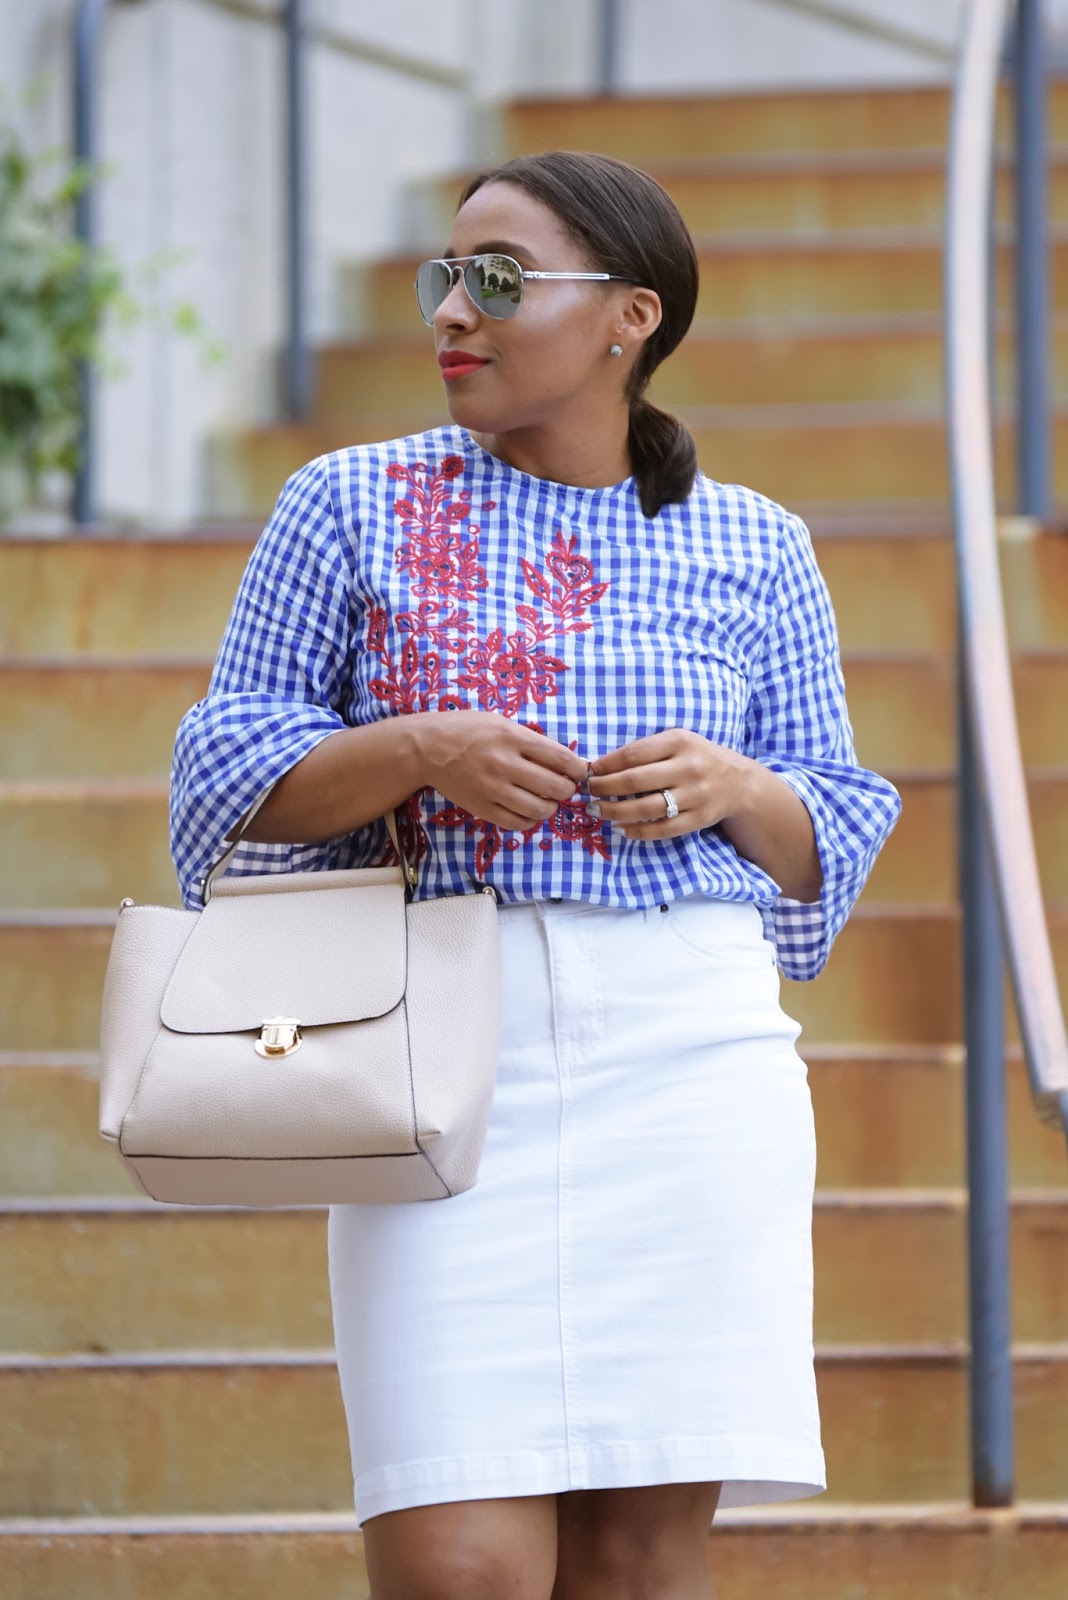 bell sleeve top, embrodiery, white skirt, zara shoes, dominican bloggers, dc bloggers, latina bloggers, armandhugon, fall outfit ideas, fall fashion